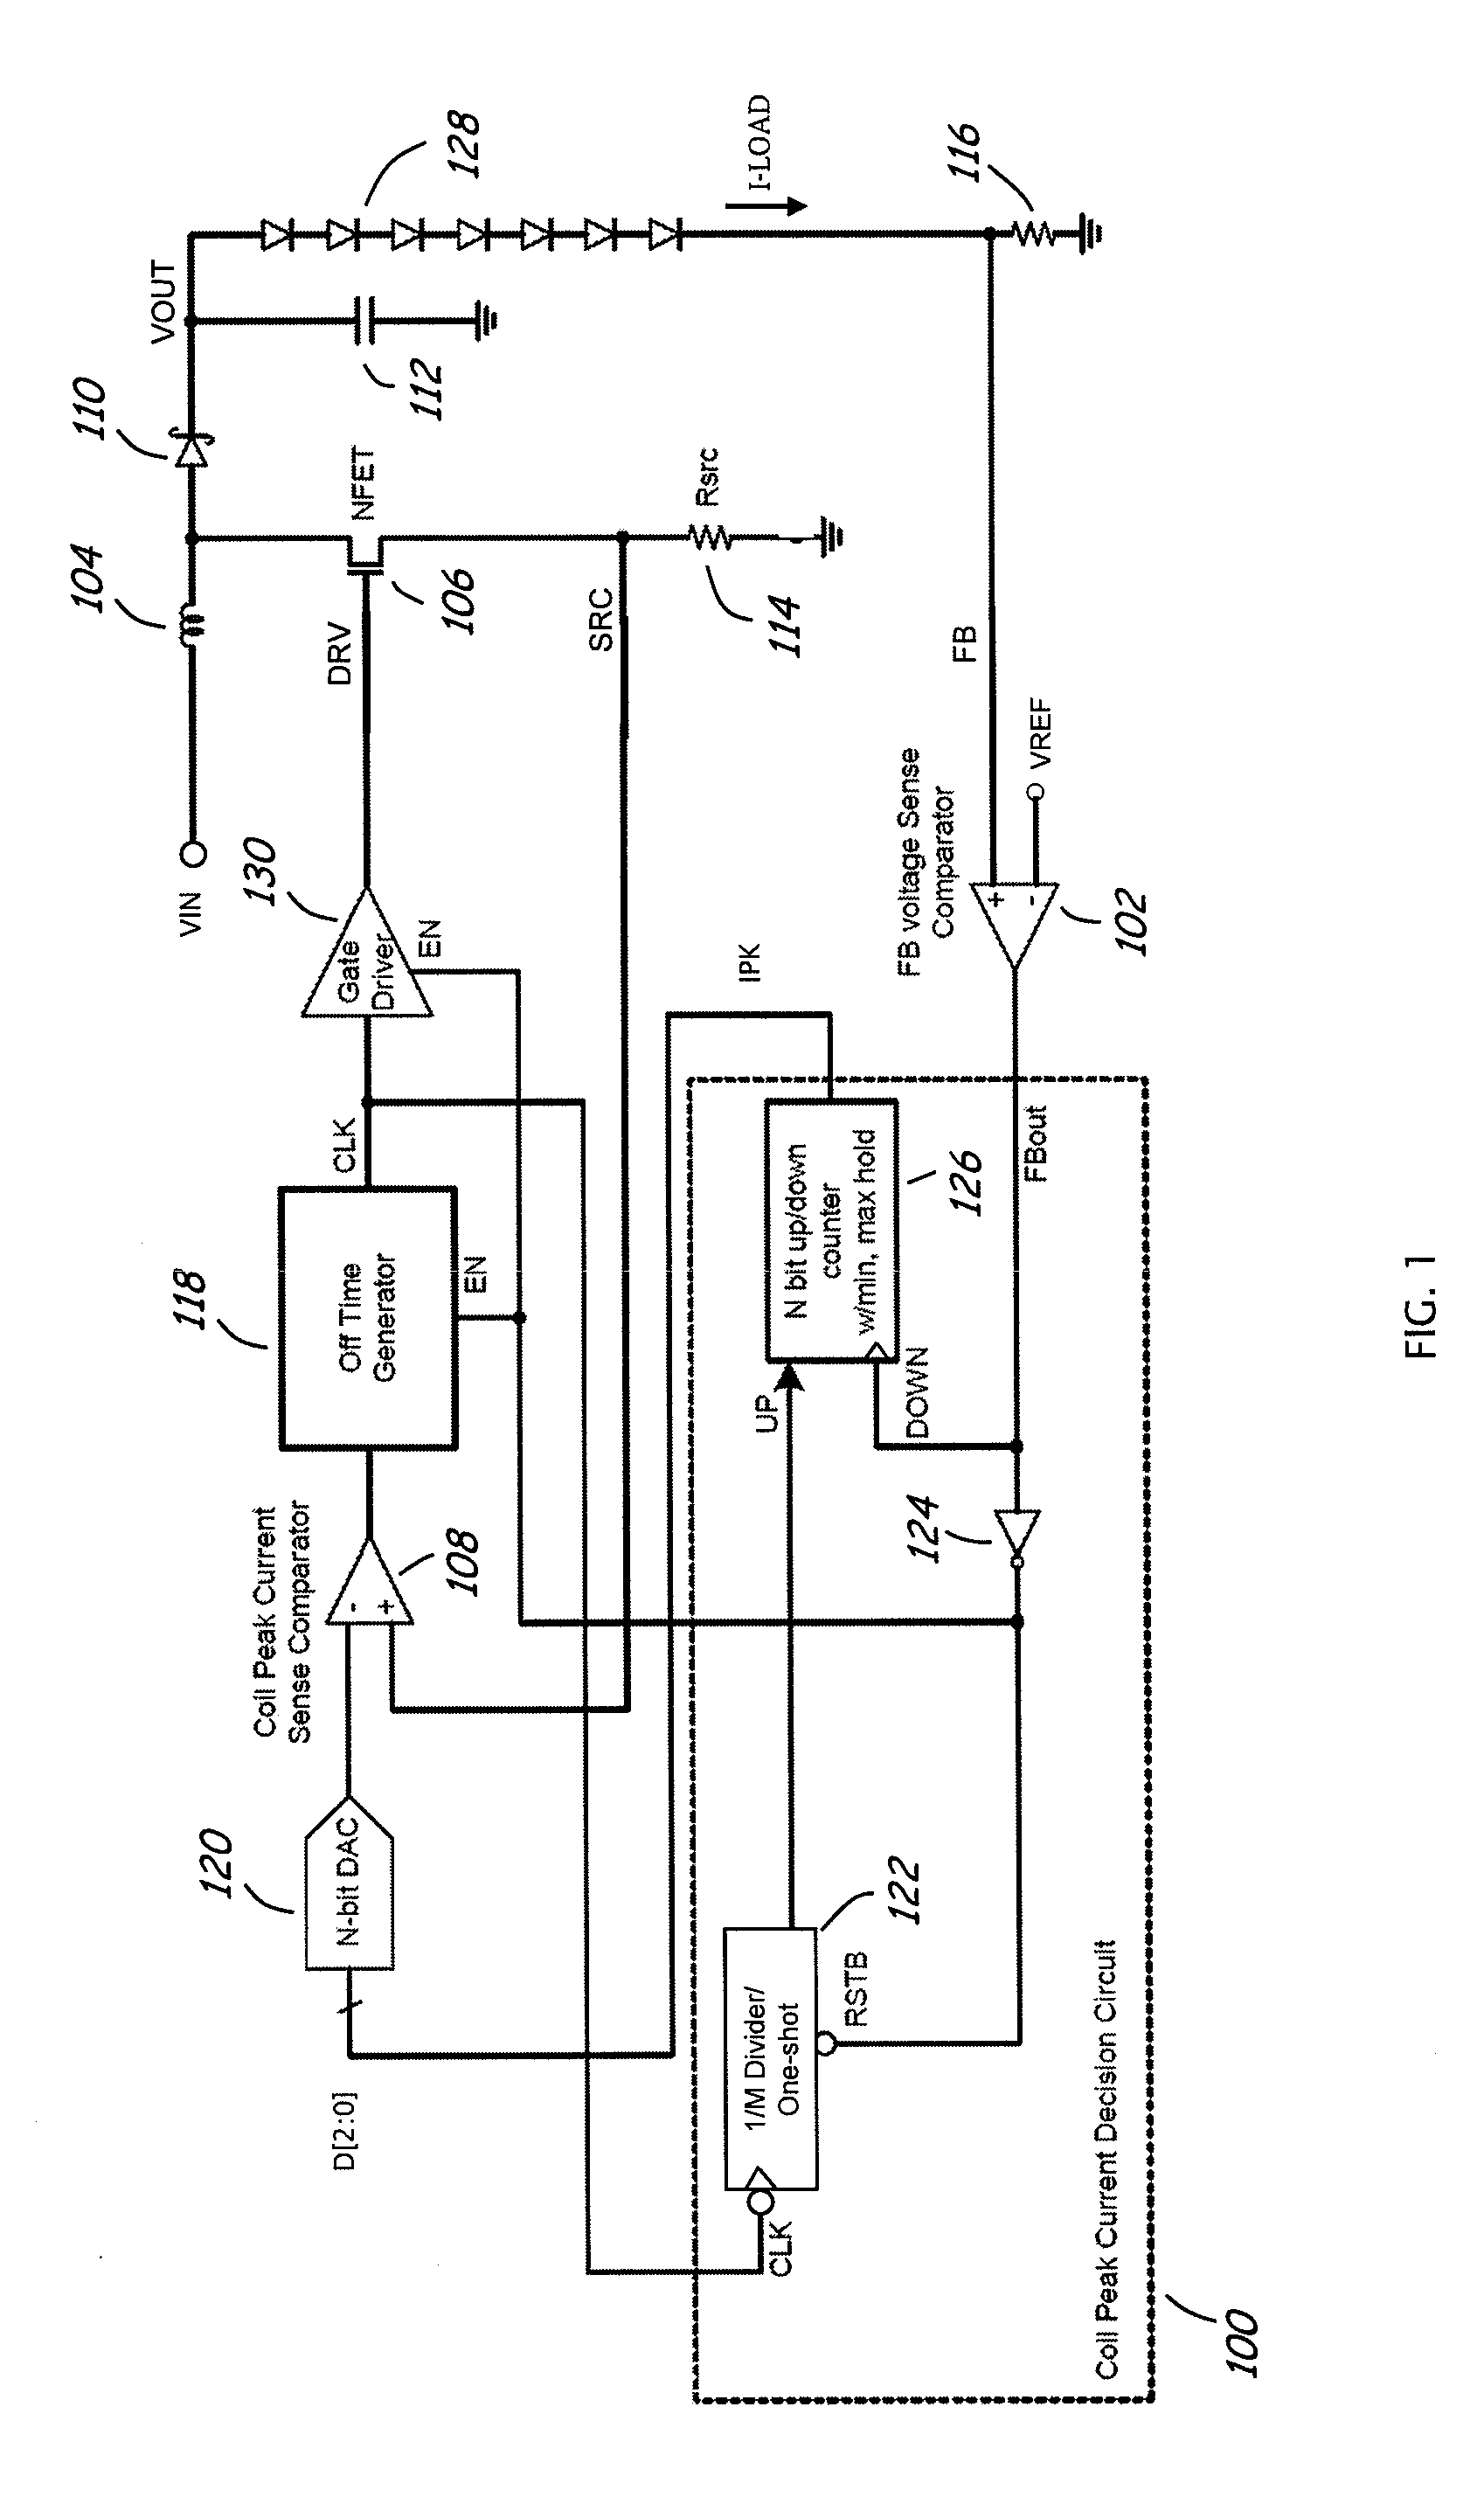 Boost converter with adaptive coil peak current